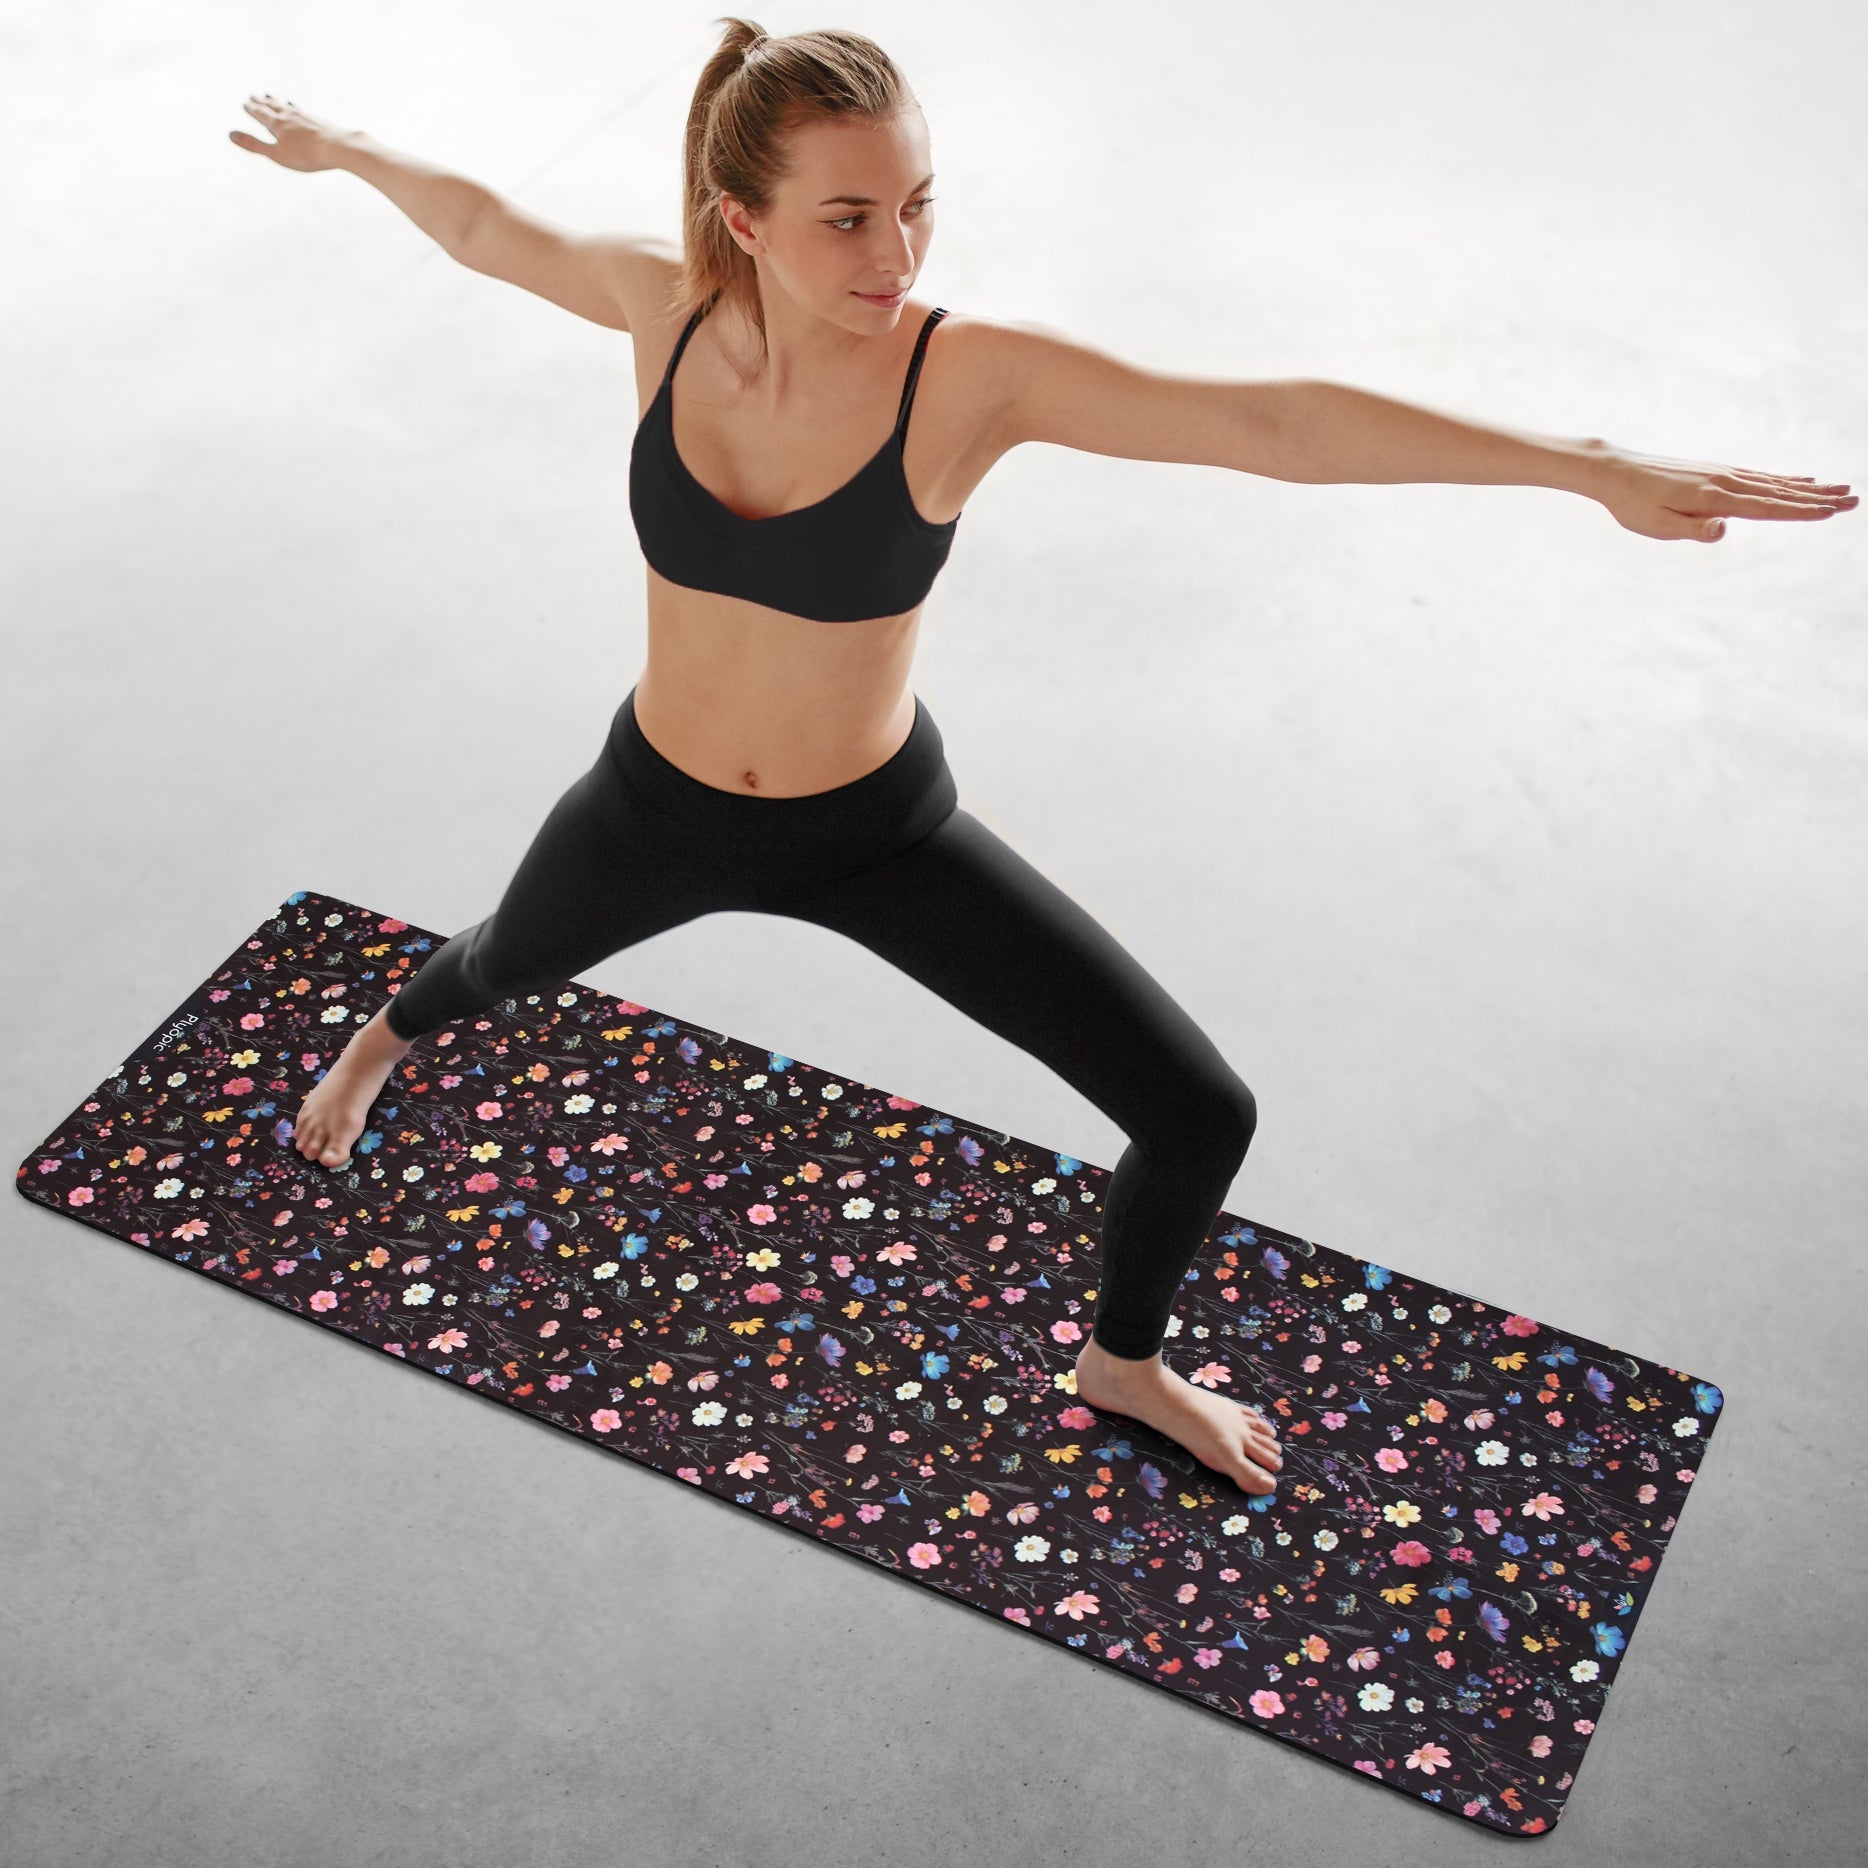 All-in-One-Yogamatte, Blumenmuster